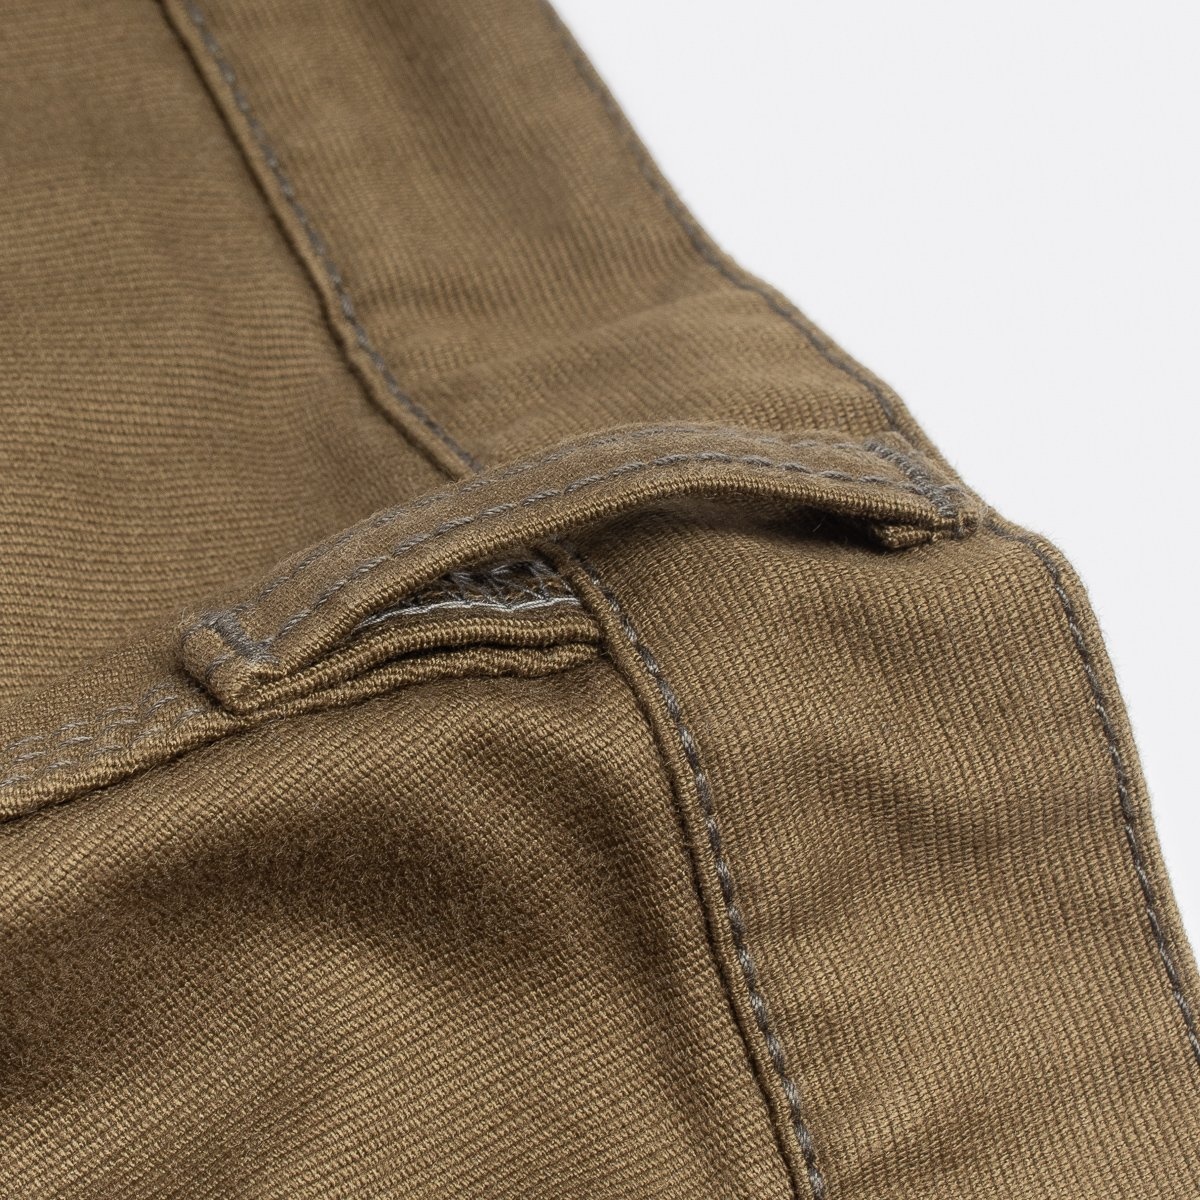 IHDR-502-OLV 11oz Cotton Whipcord Cargo Pants - Olive - 14